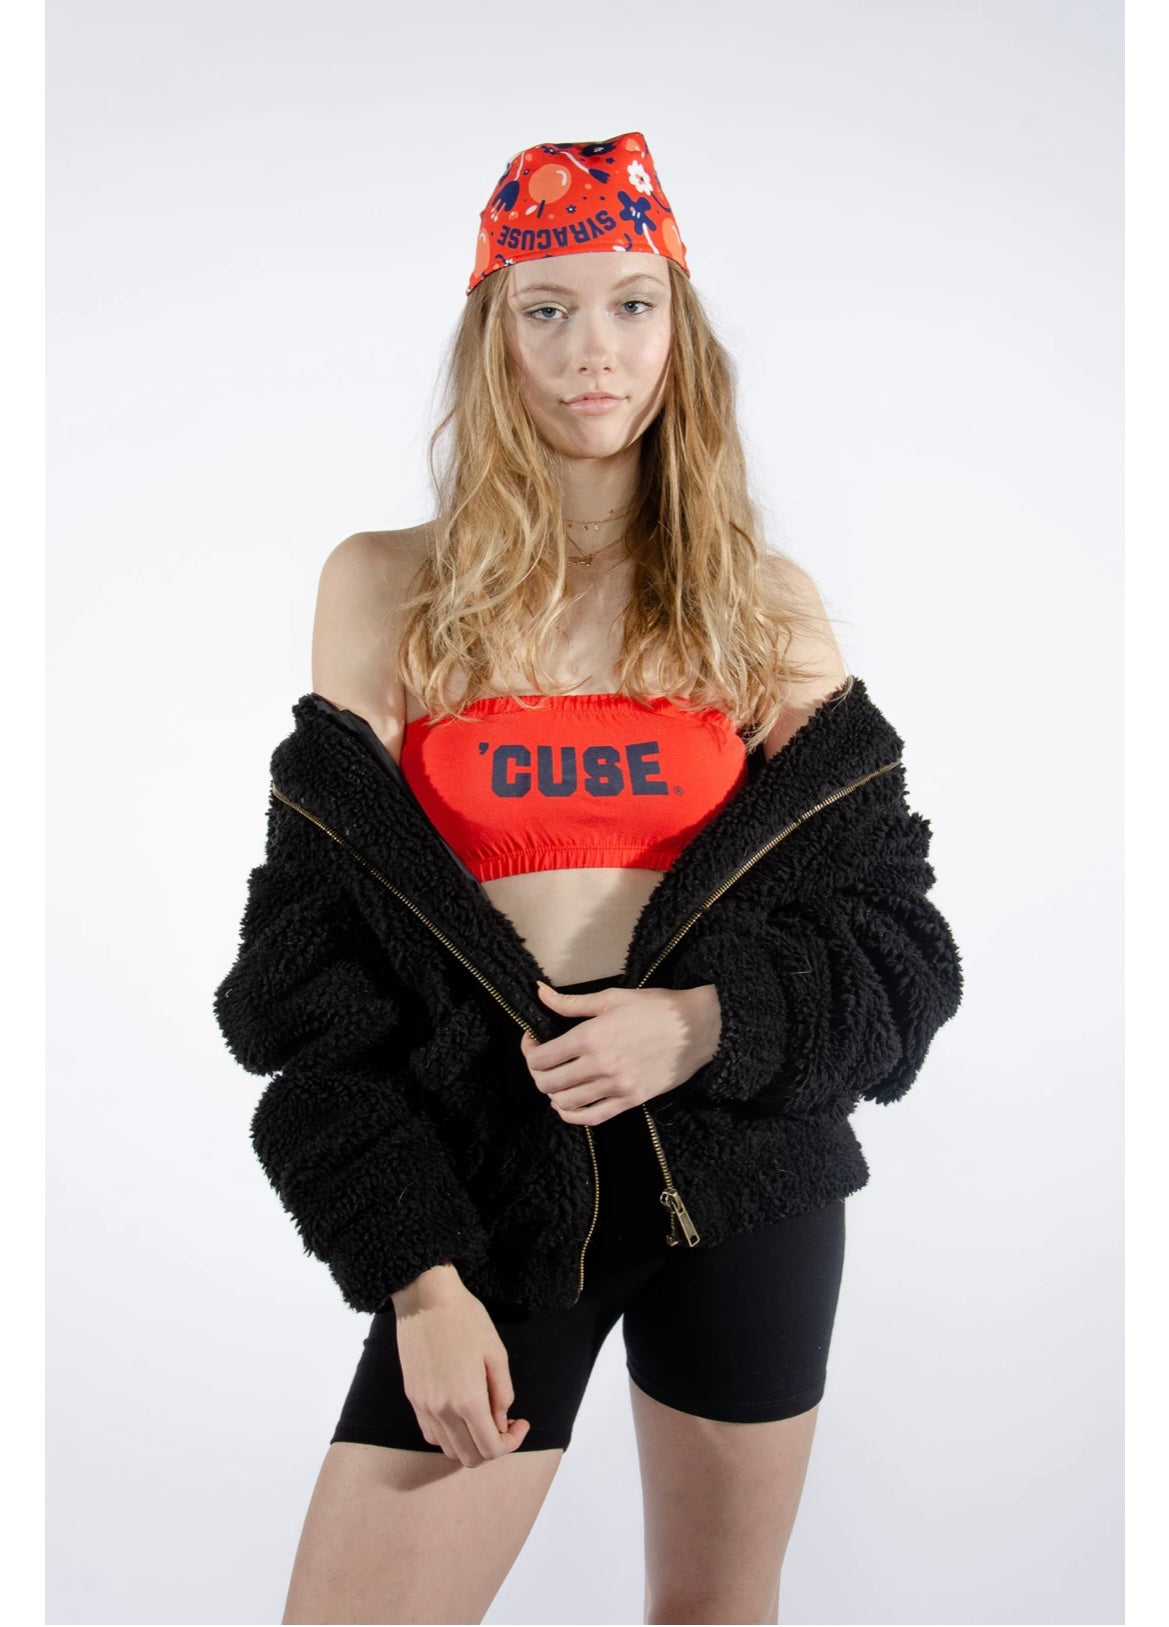 Syracuse Bandeau Top by Hype & Vice